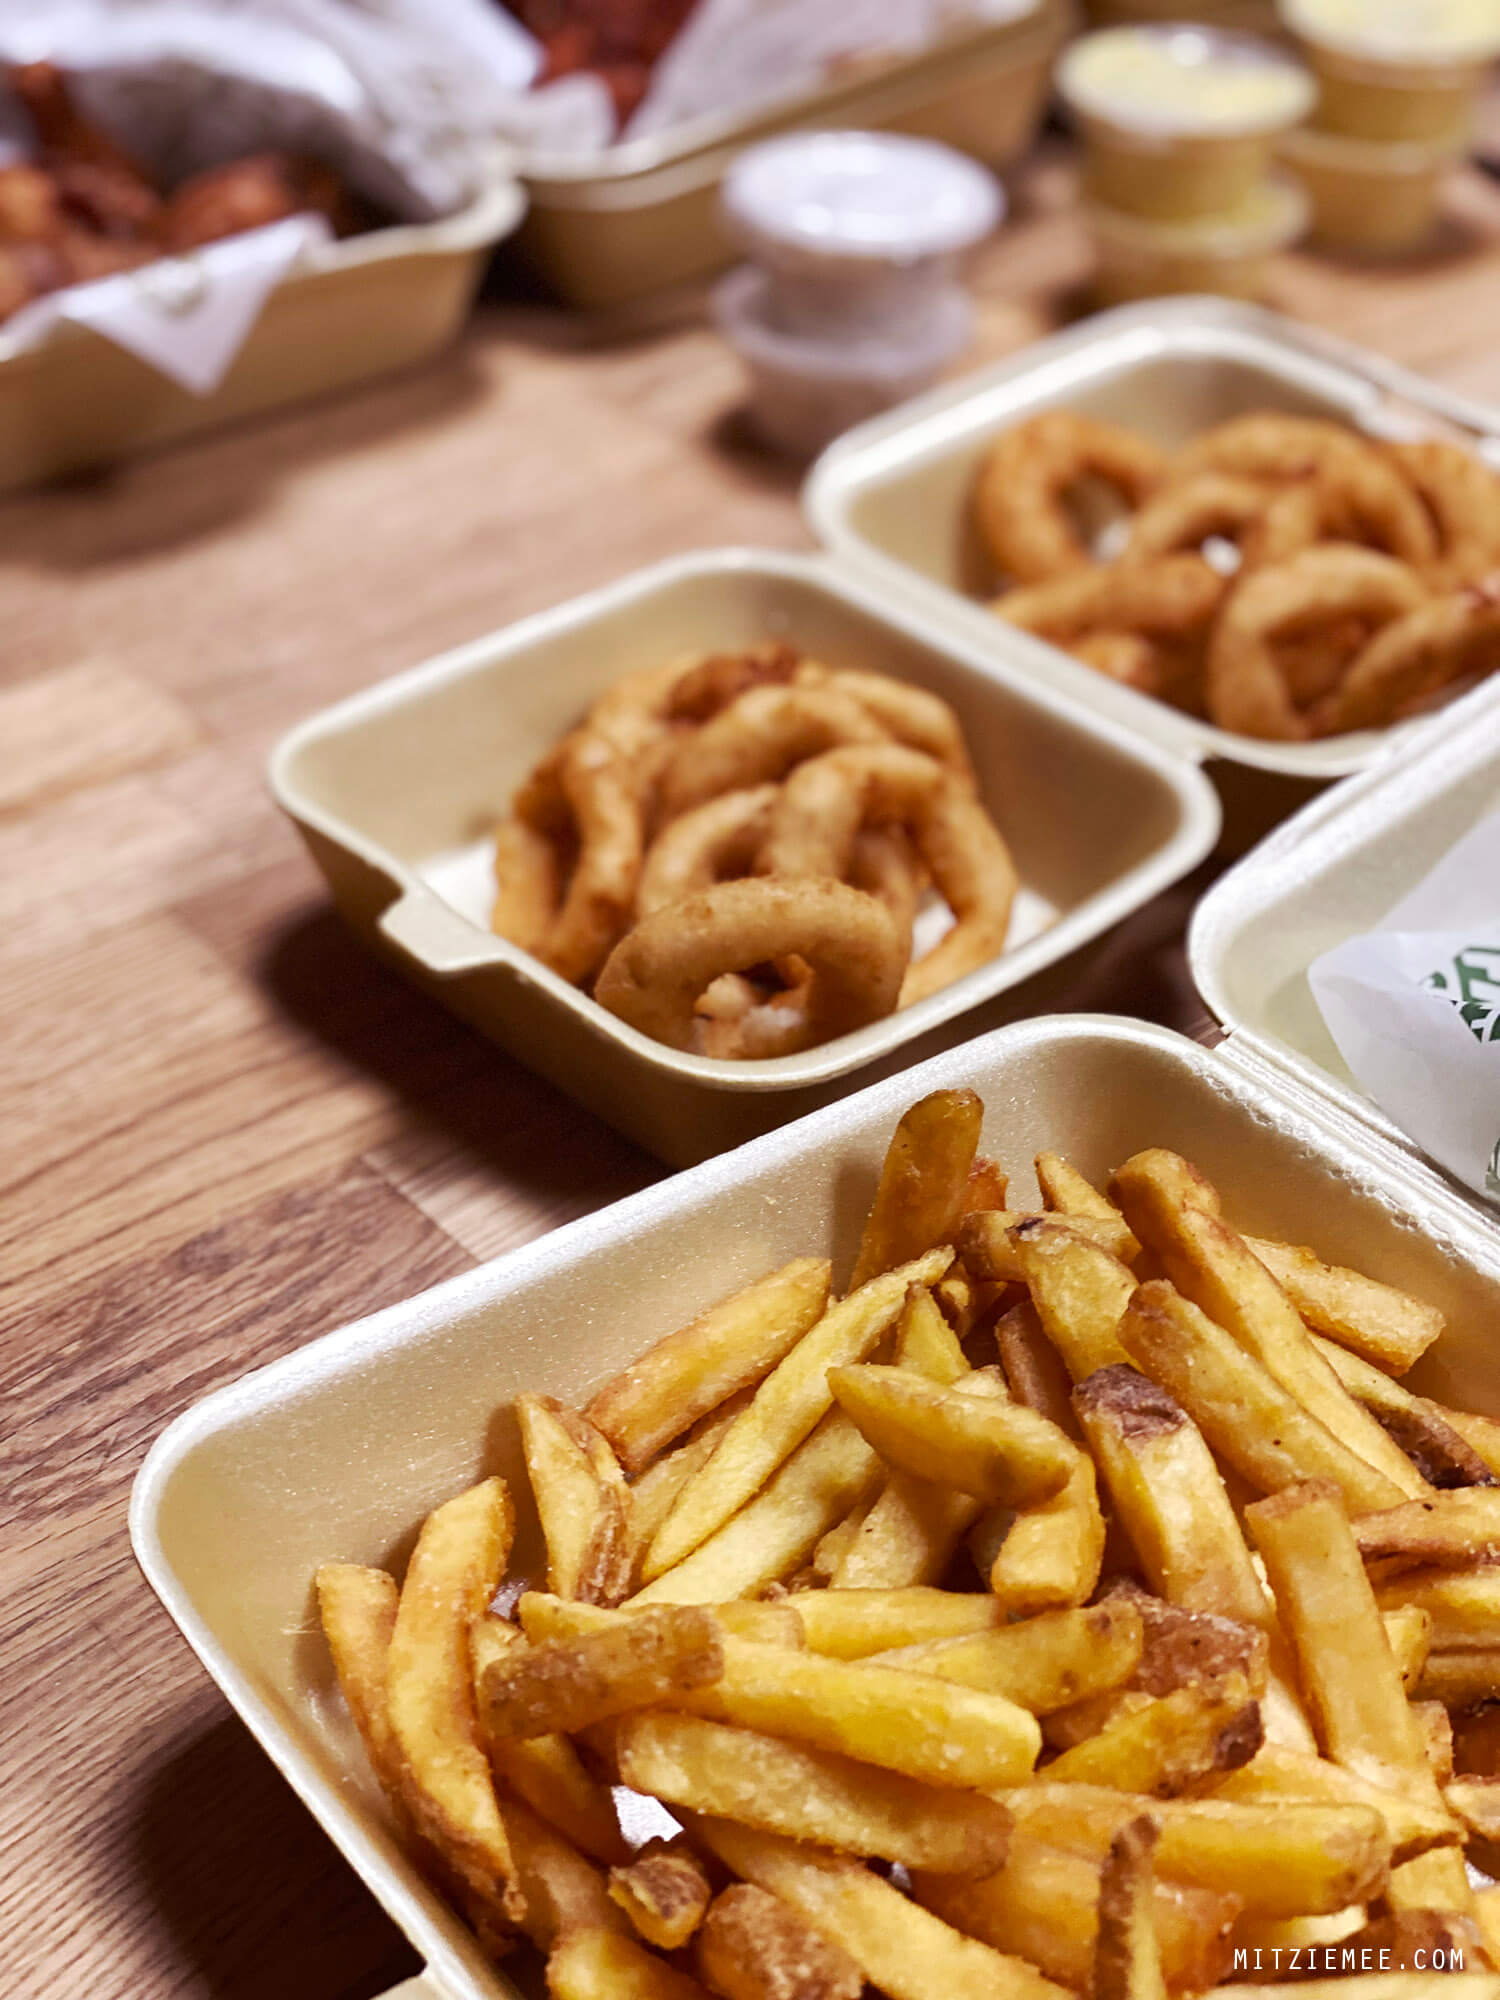 Takeout from Wingstop, Dubai